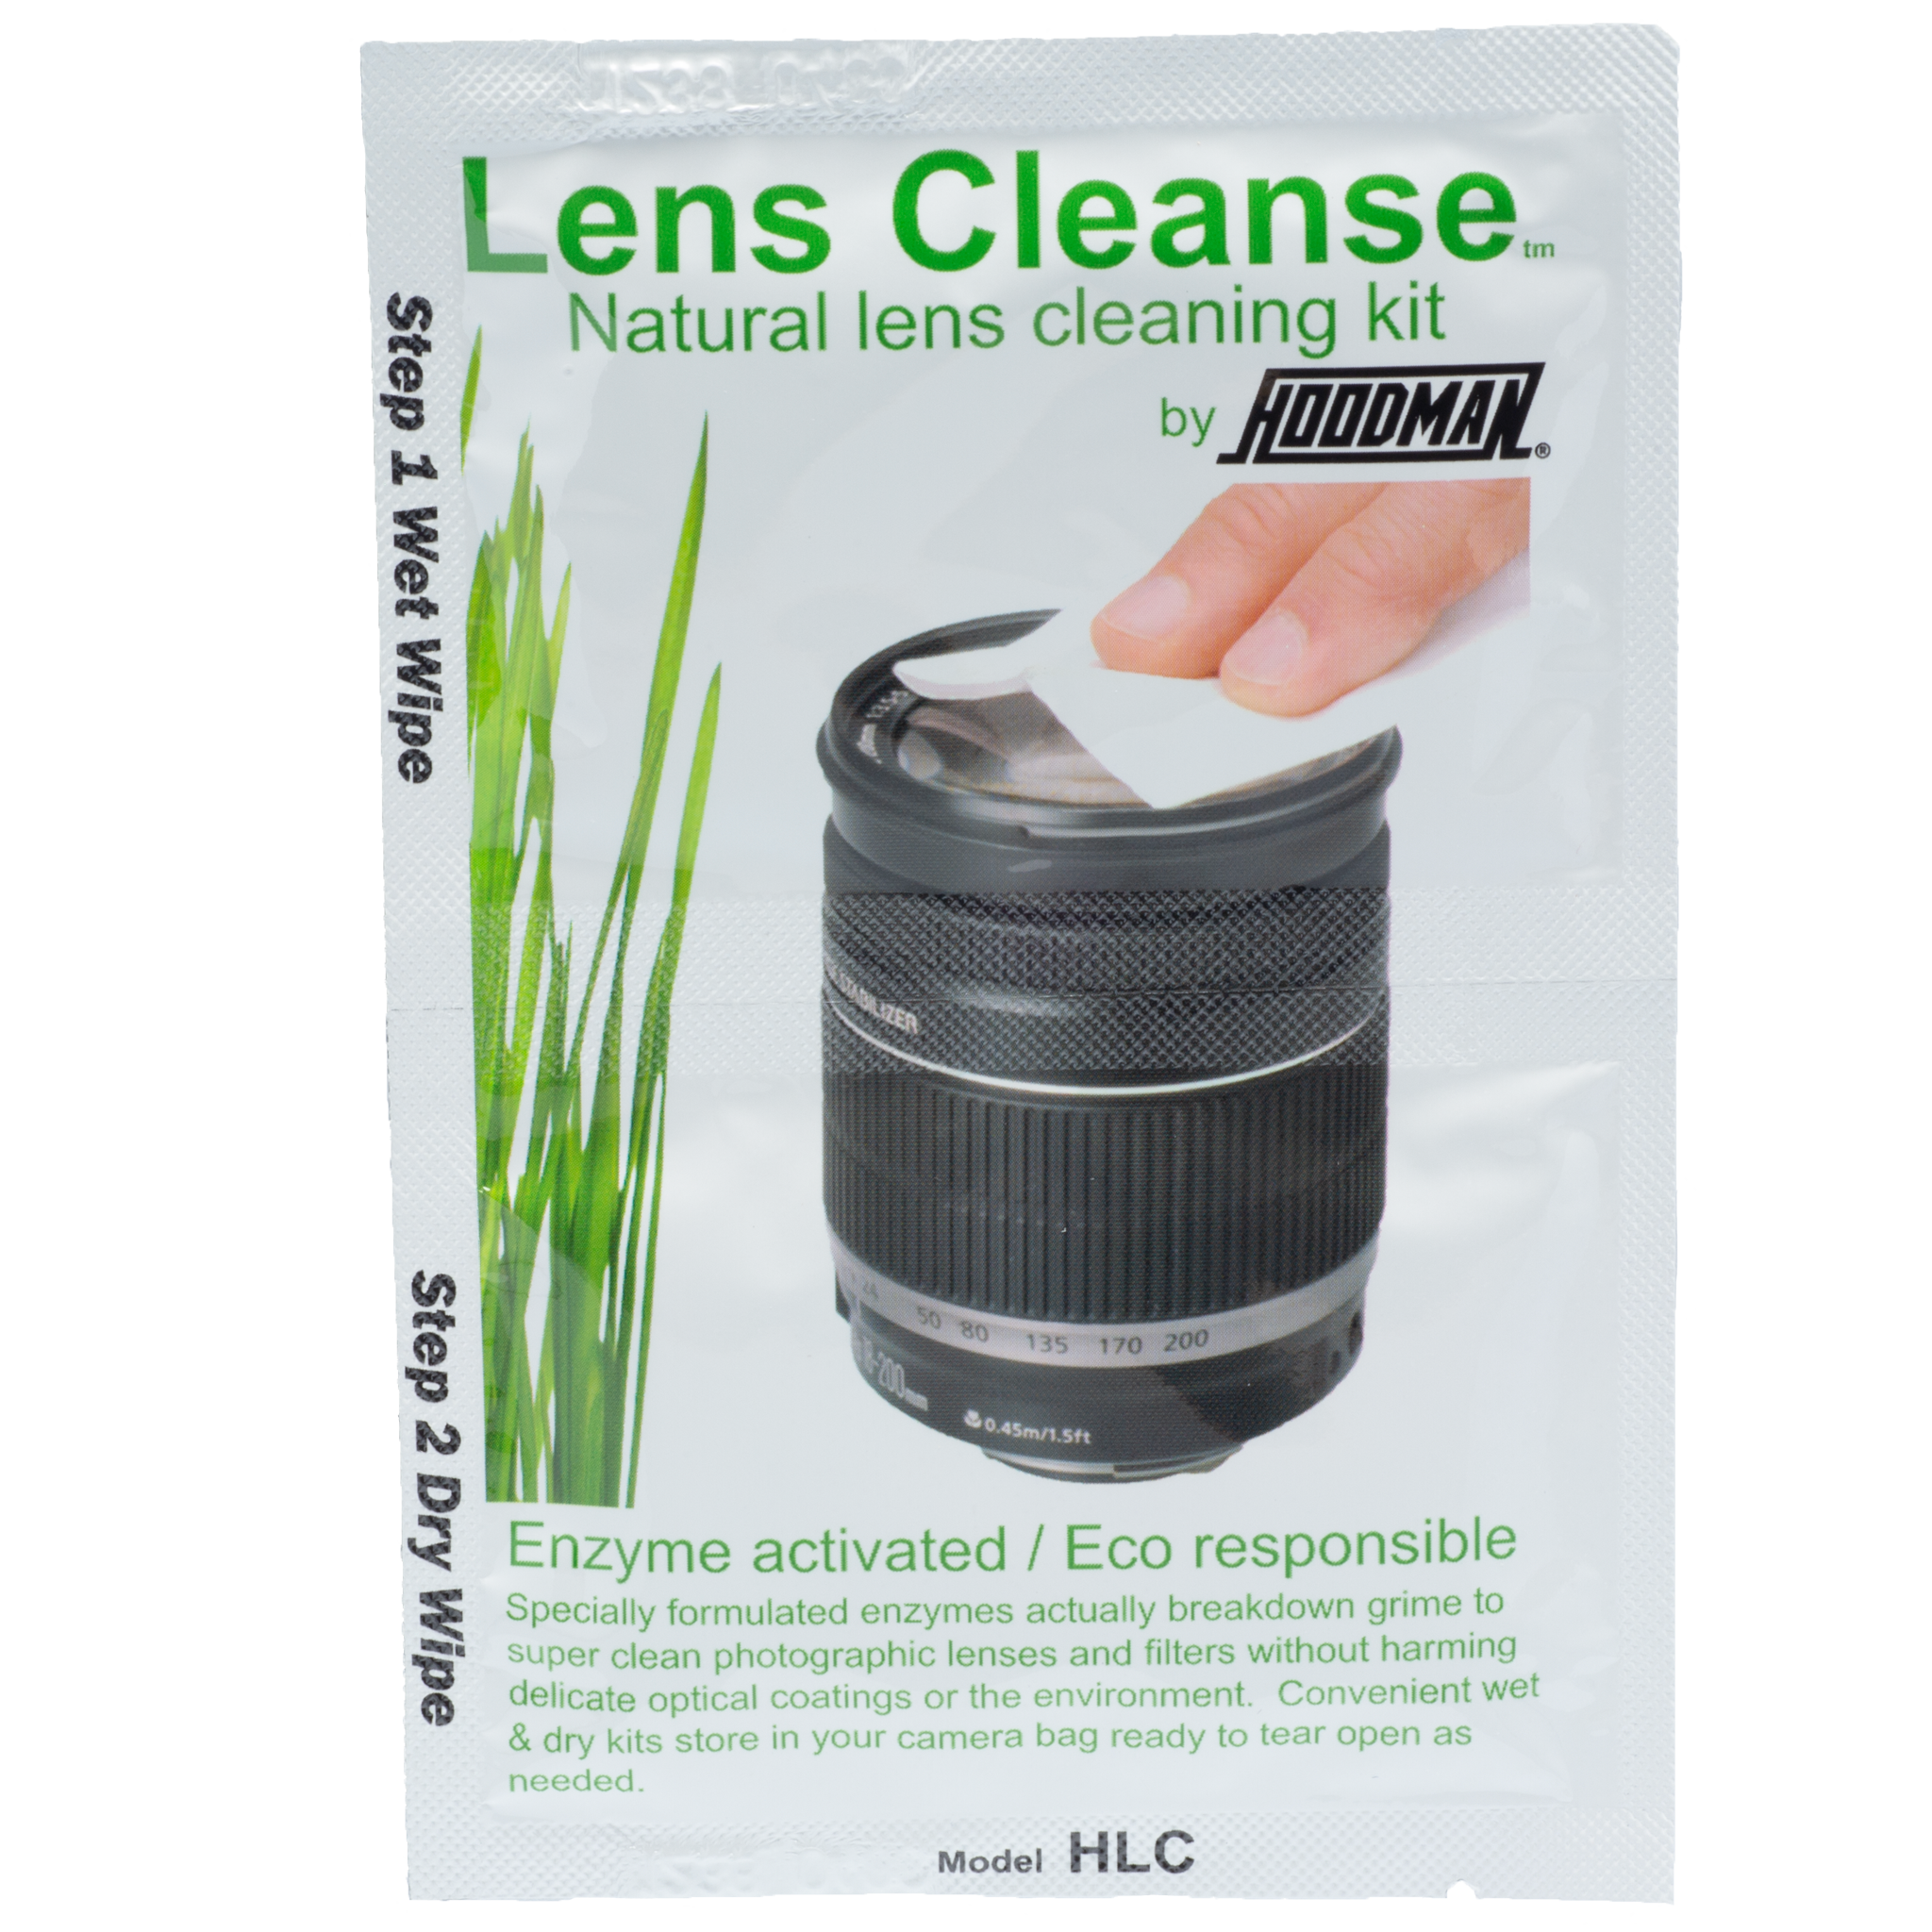 Lens Cleanse Natural Lens Cleaning Kits (12 pack)